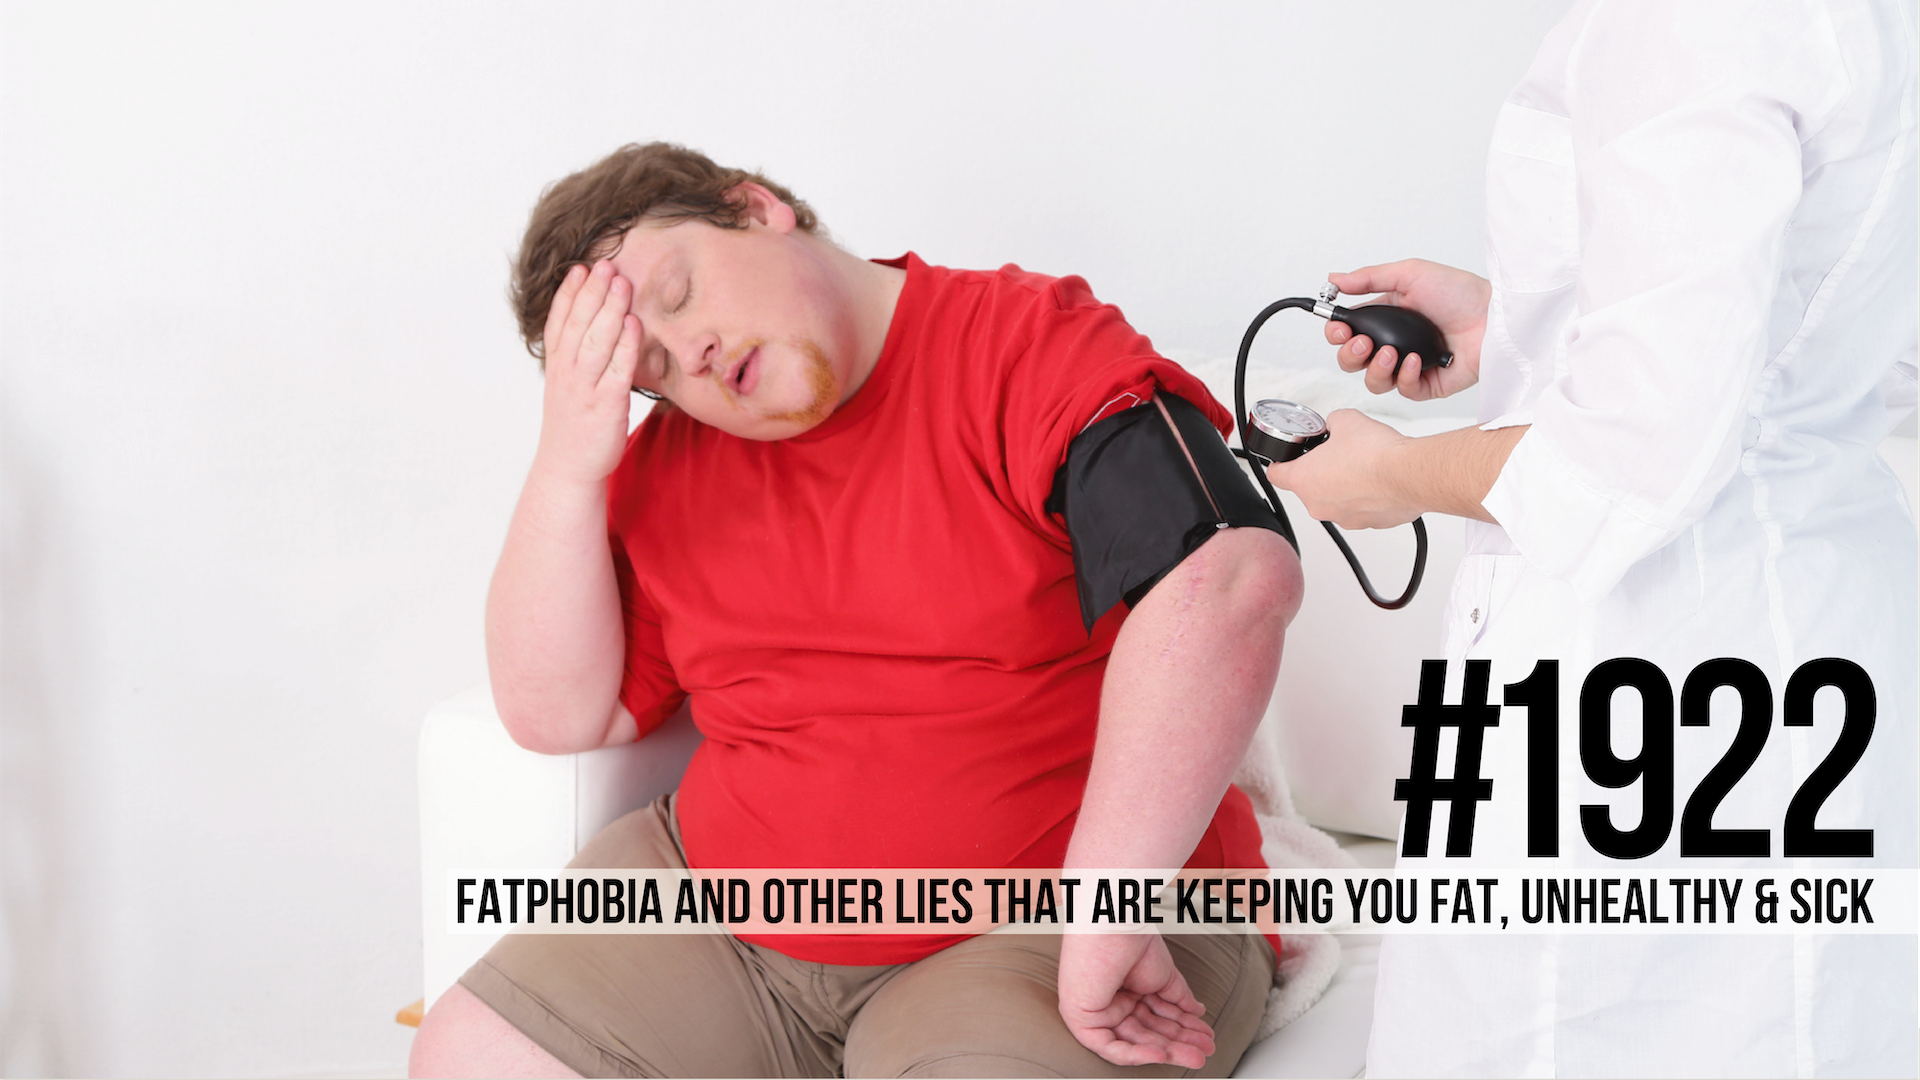 1922: Fatphobia & Other Lies That Are Keeping You Fat, Unhealthy & Sick